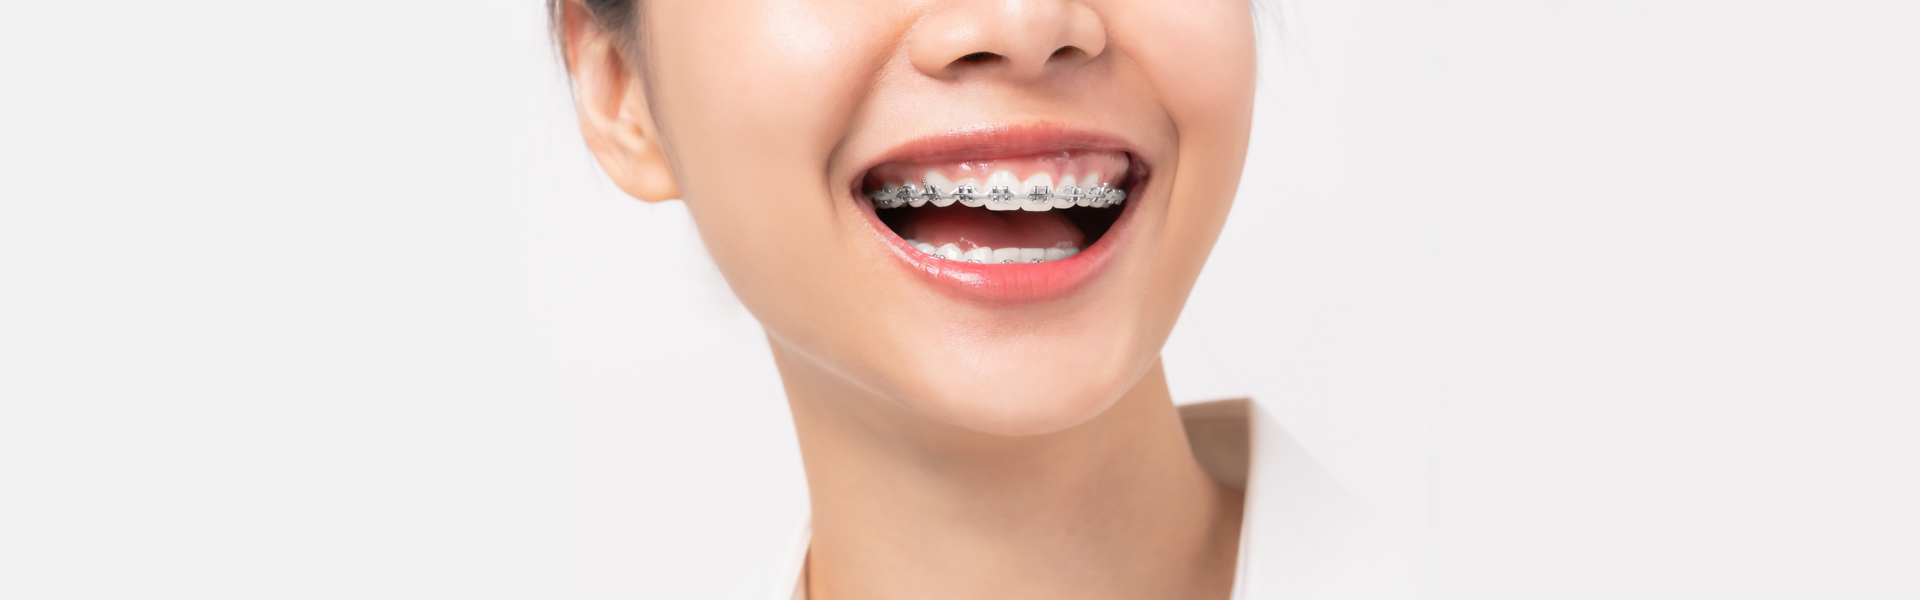 Clear Braces Excellent Alternative Than Metal Braces To Correct Orthodontic Problems